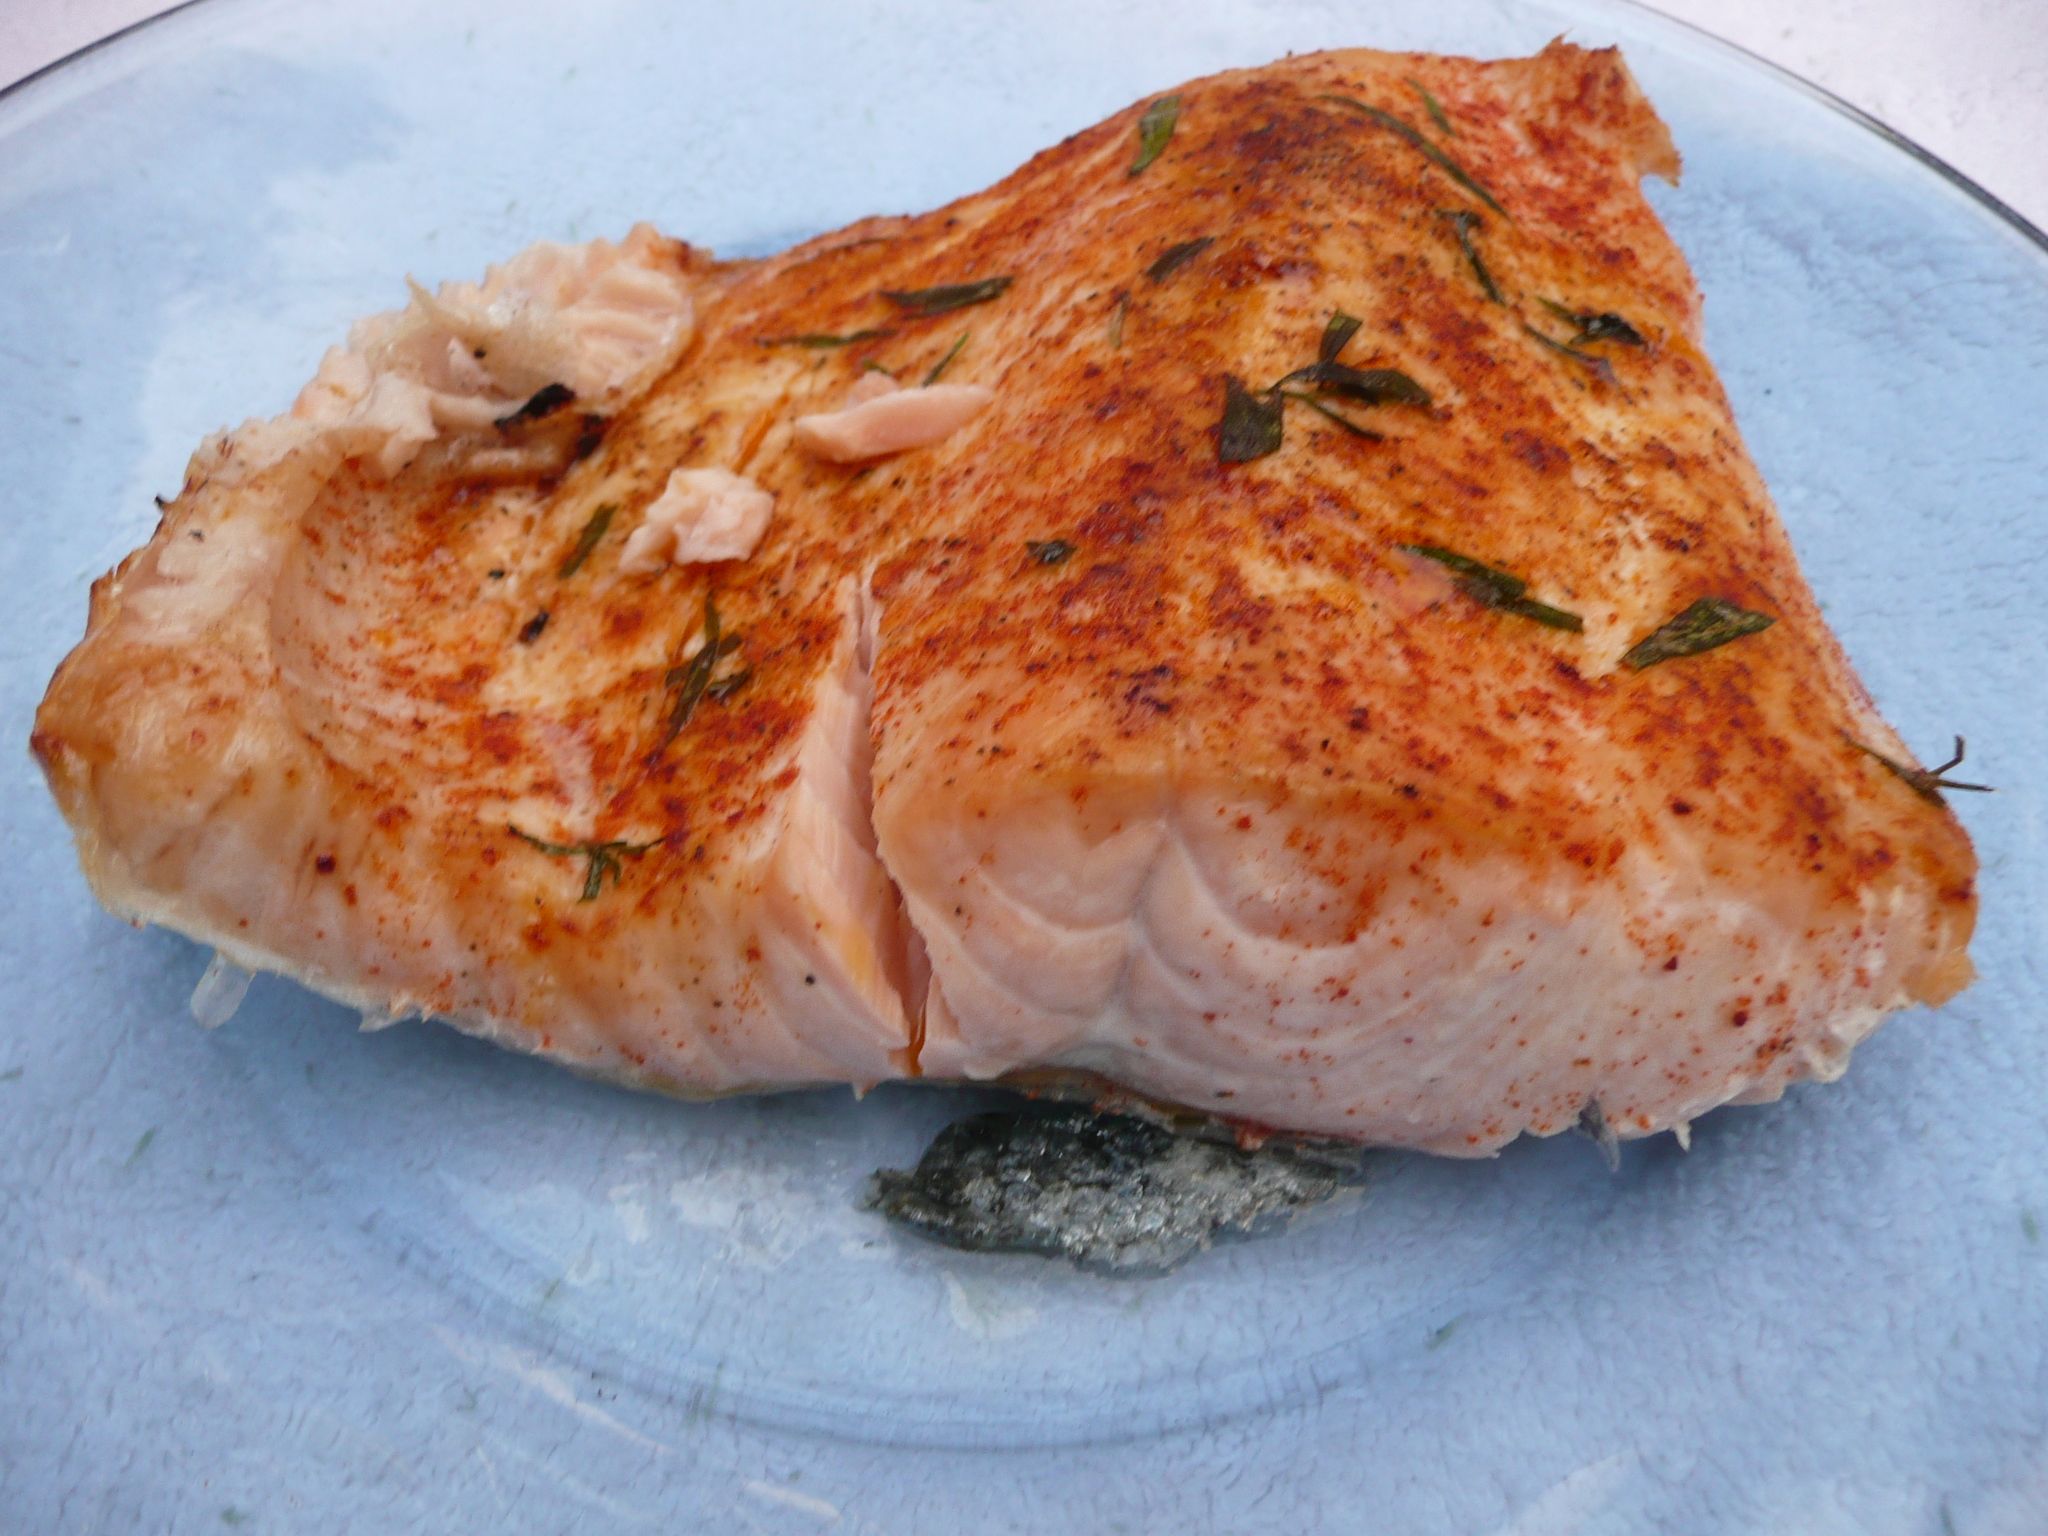 How do you know when salmon is fully cooked?